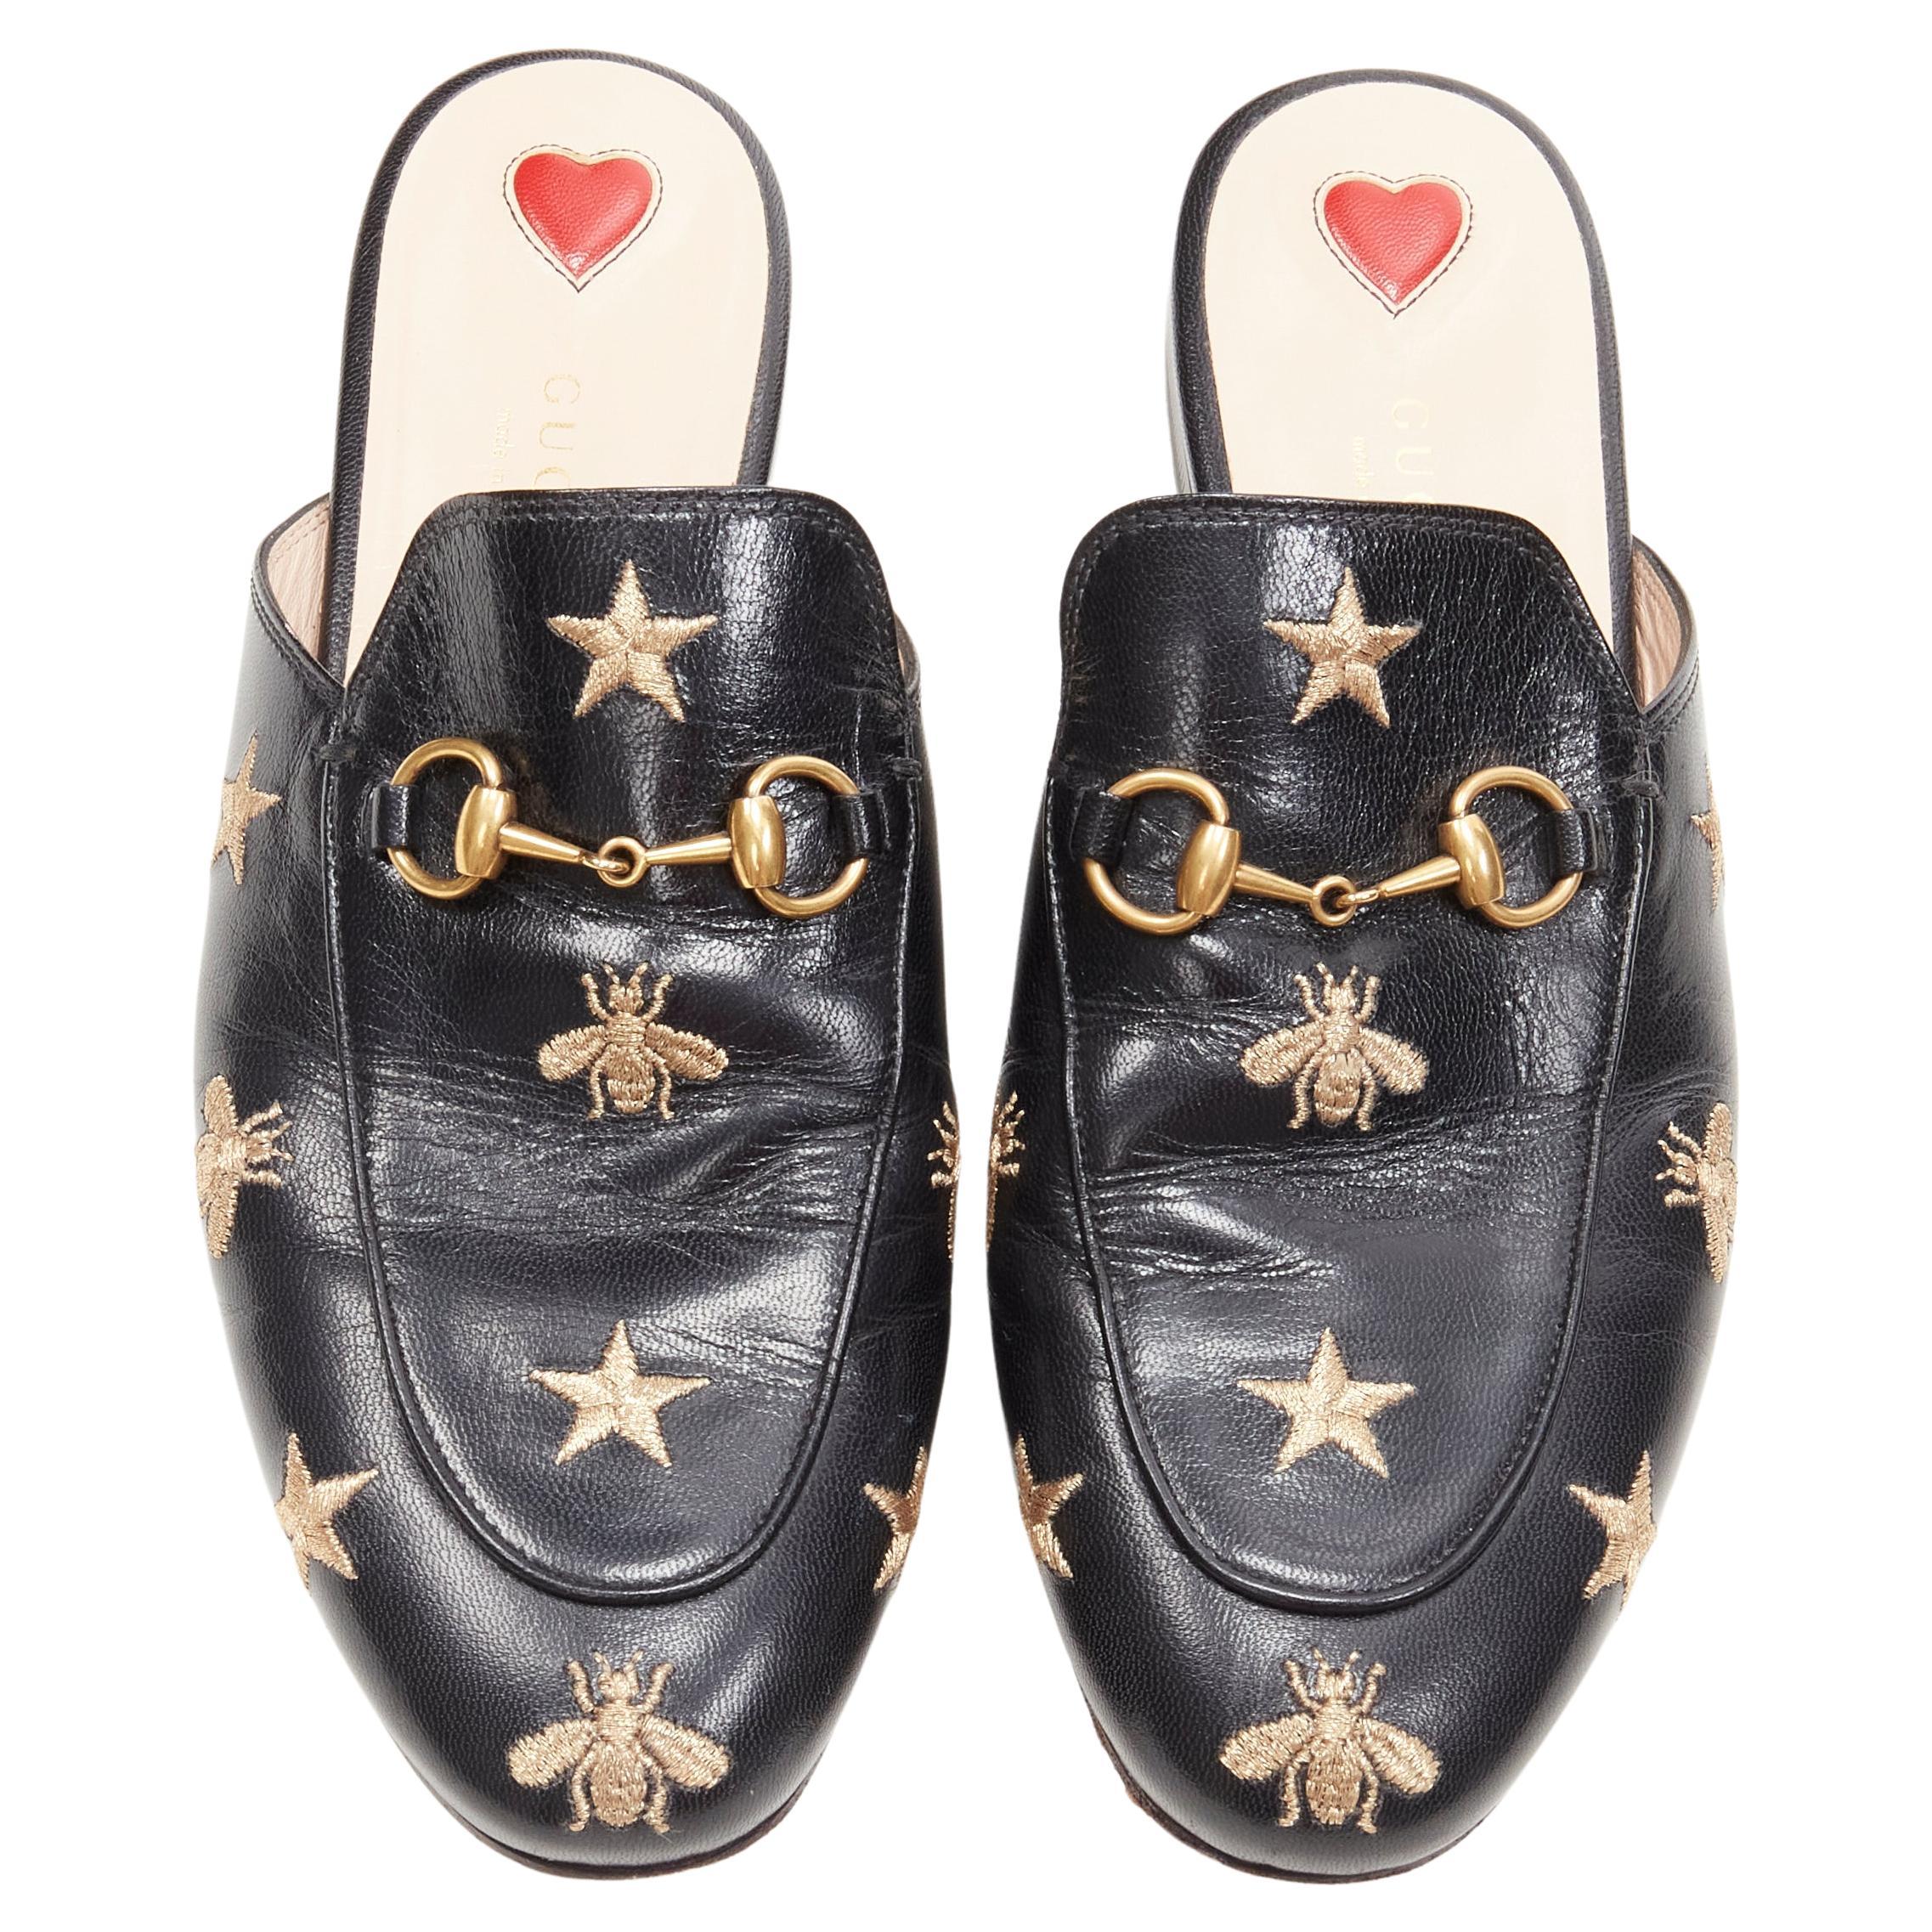 GUCCI Princetown Bees & Stars black gold horsebit loafer slippers EU37.5